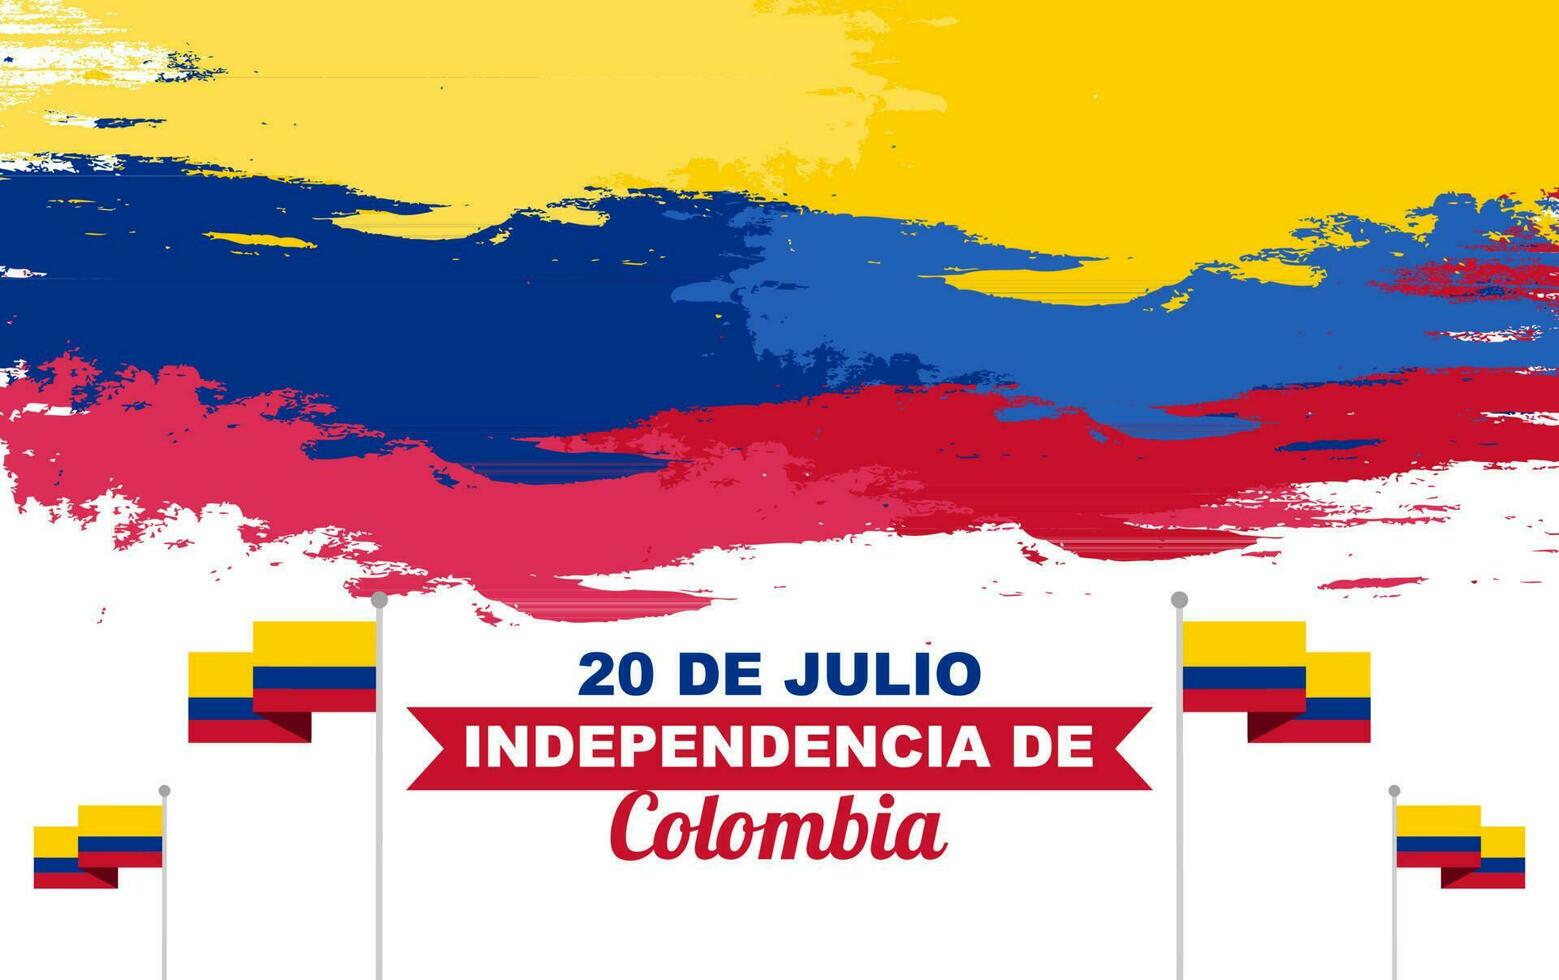 Design of Colombia independence day on 20th july, celebration greeting poster with flag decoration in brush stroke style vector